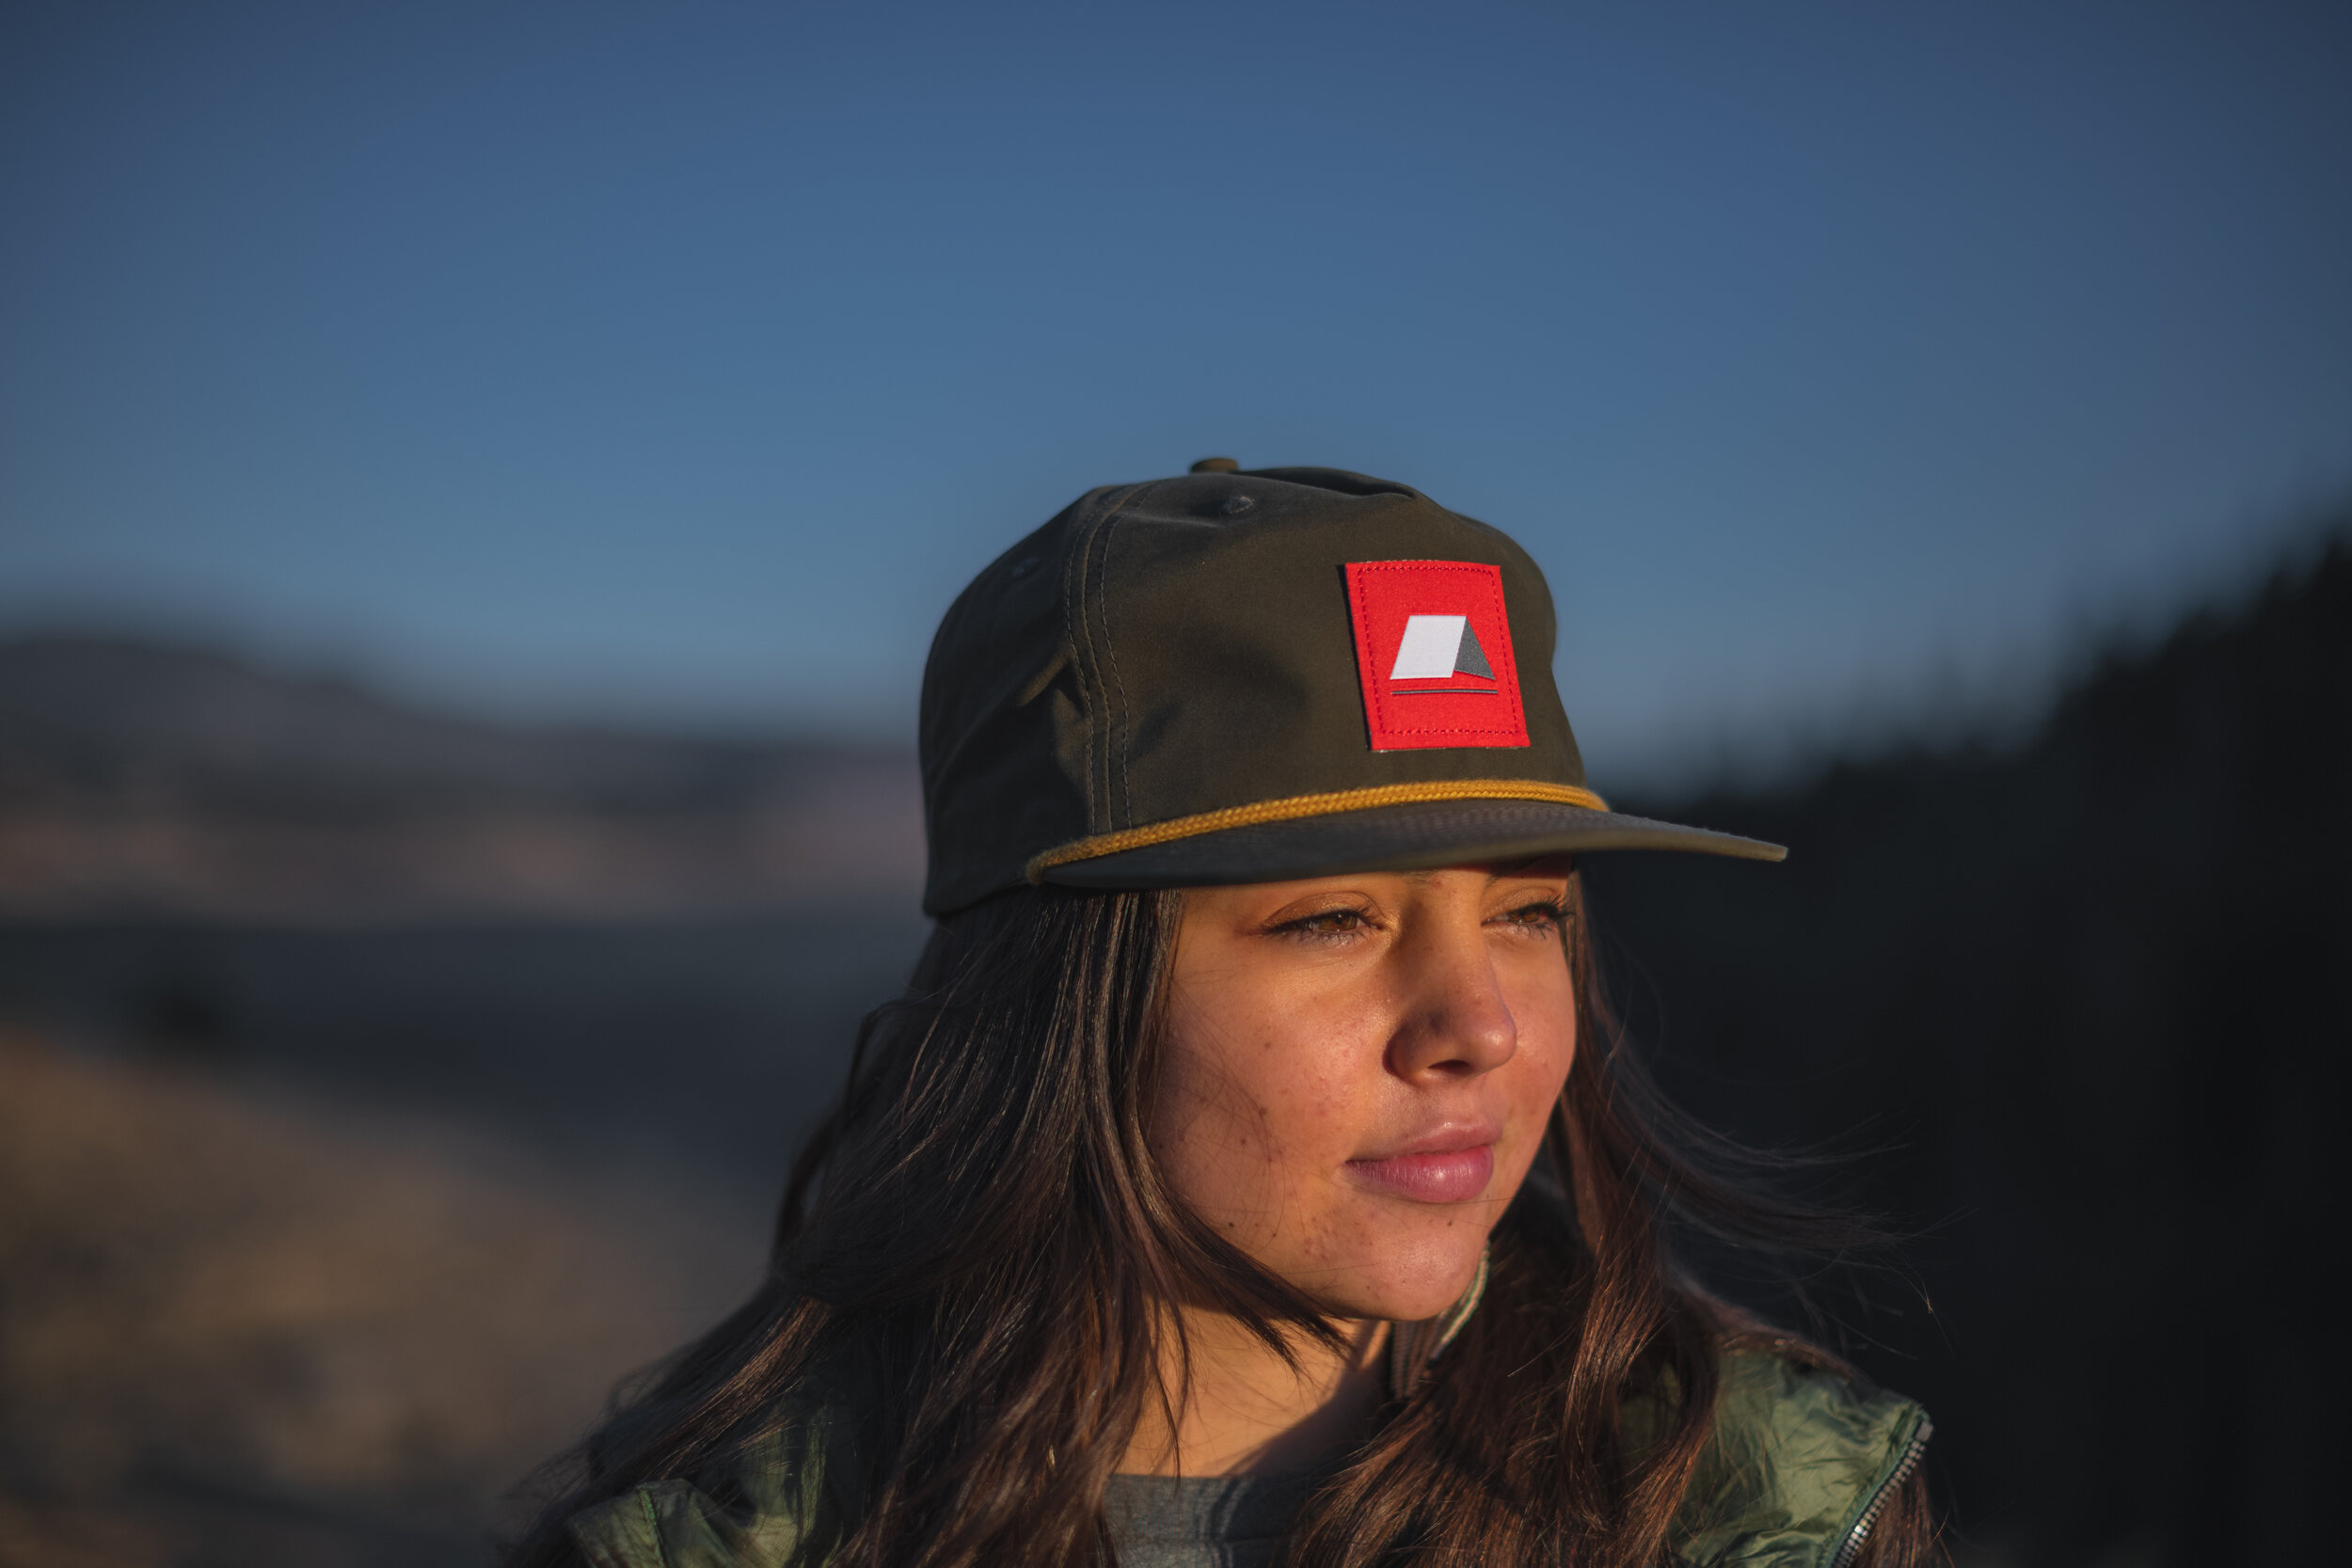 Root House Patch Hat - Camo Trucker — ROOT HOUSE Coffee + Shop